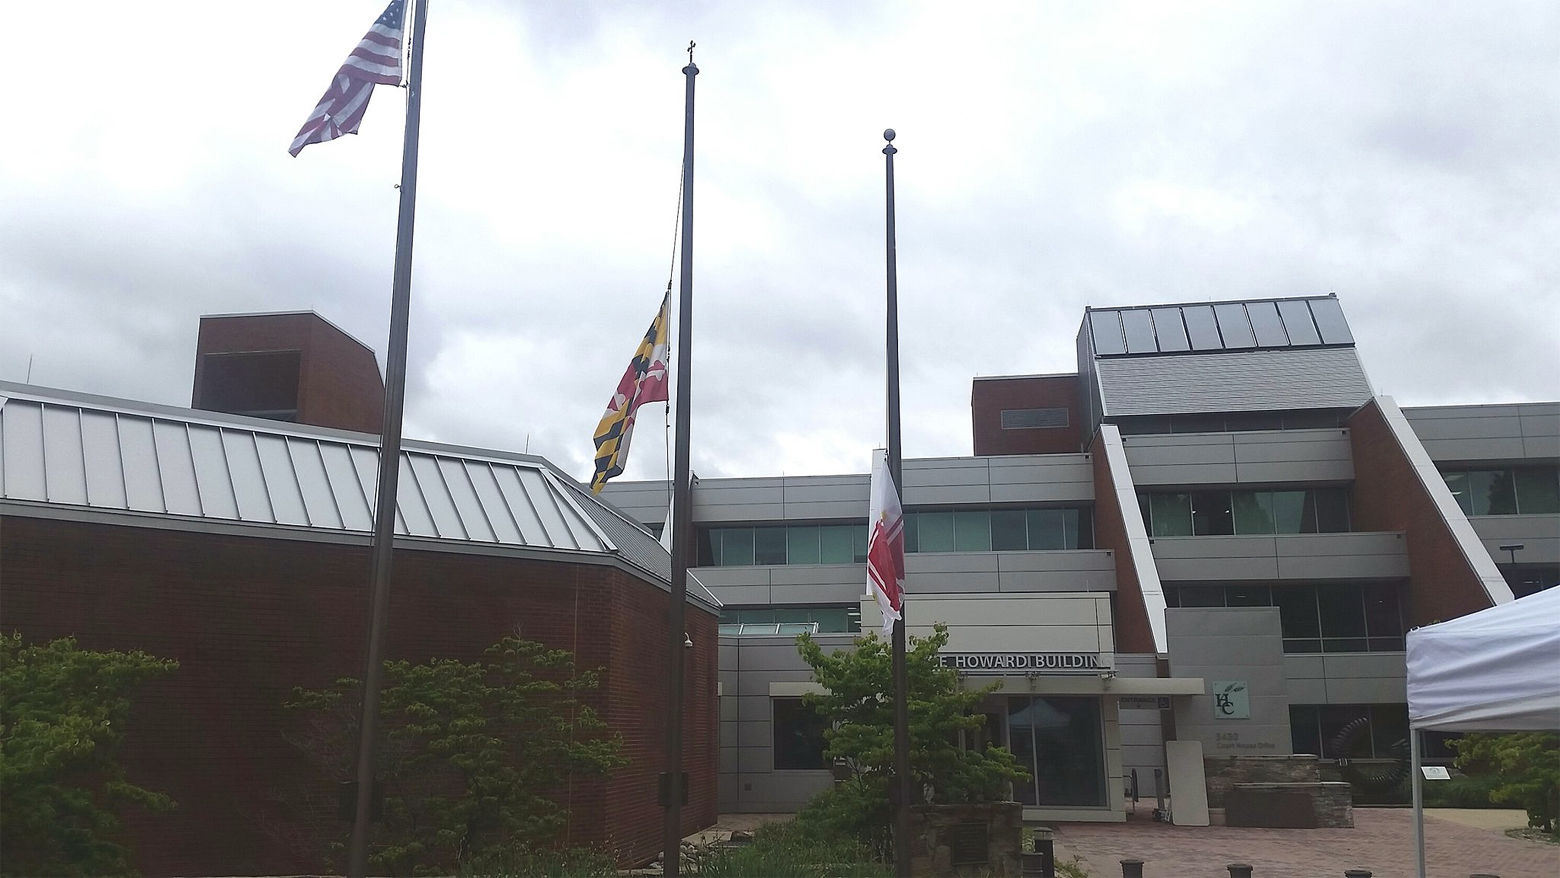 The state flag of Maryland and the flag of Howard County fly at half mast in honor of National Guardsman Eddison Hermon who was killed when floodwaters rushed through Ellicott City on May 27, 2018. (WTOP/Kathy Stewart)